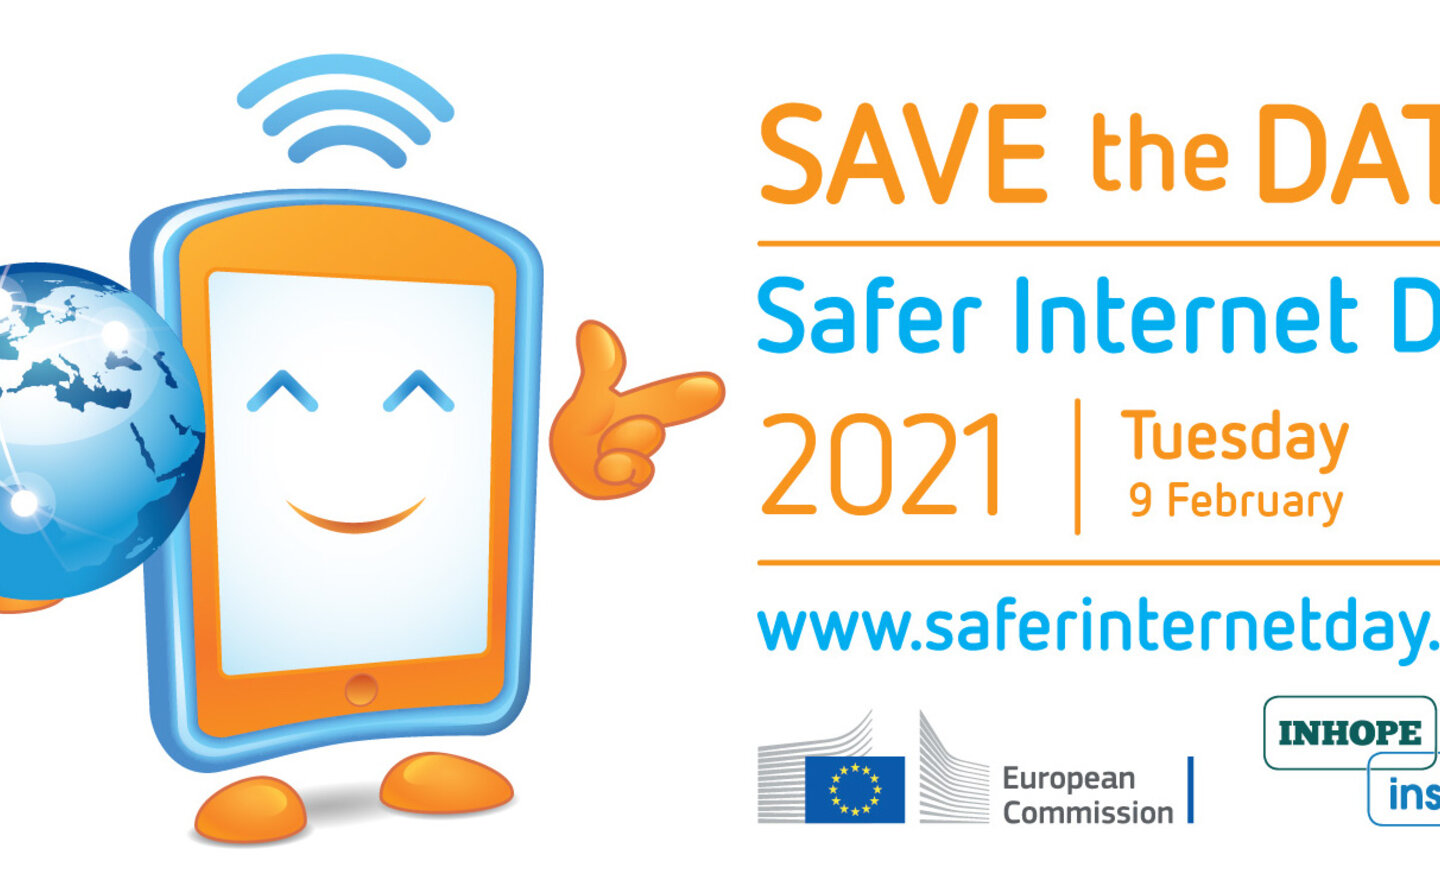 Image of Safer Internet Day 2021 with Year 2